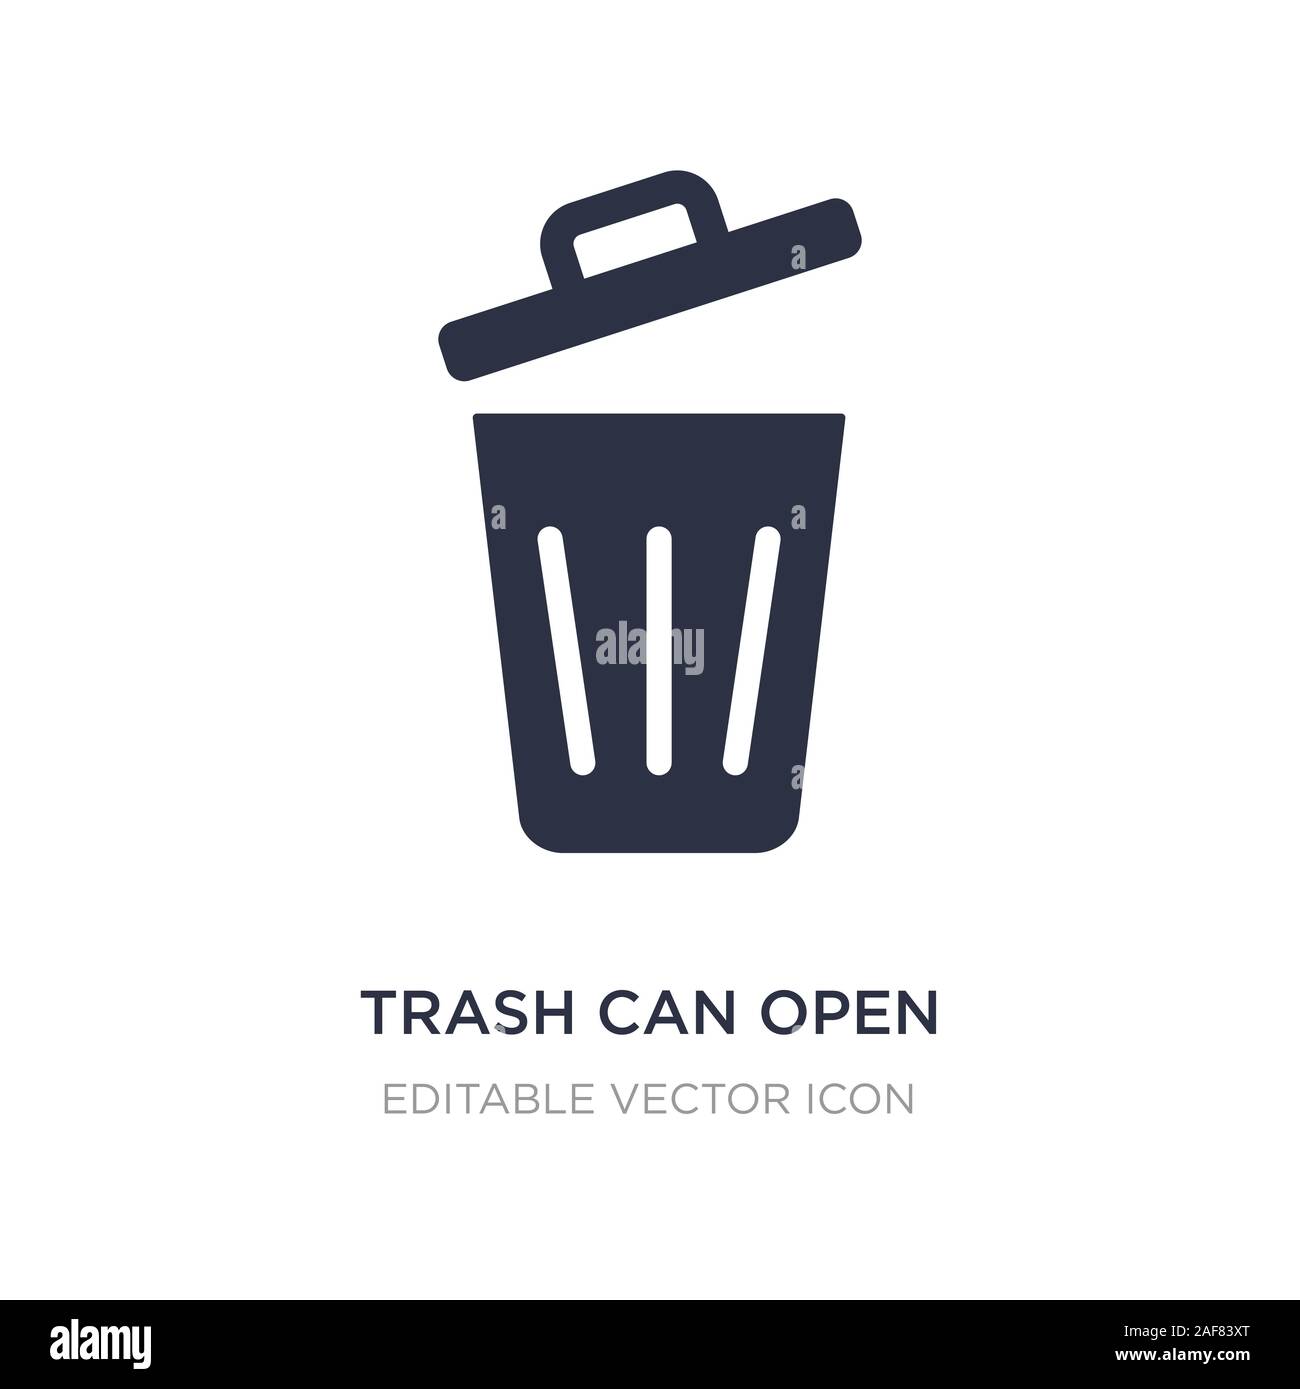 https://c8.alamy.com/comp/2AF83XT/trash-can-open-icon-on-white-background-simple-element-illustration-from-tools-and-utensils-concept-trash-can-open-icon-symbol-design-2AF83XT.jpg